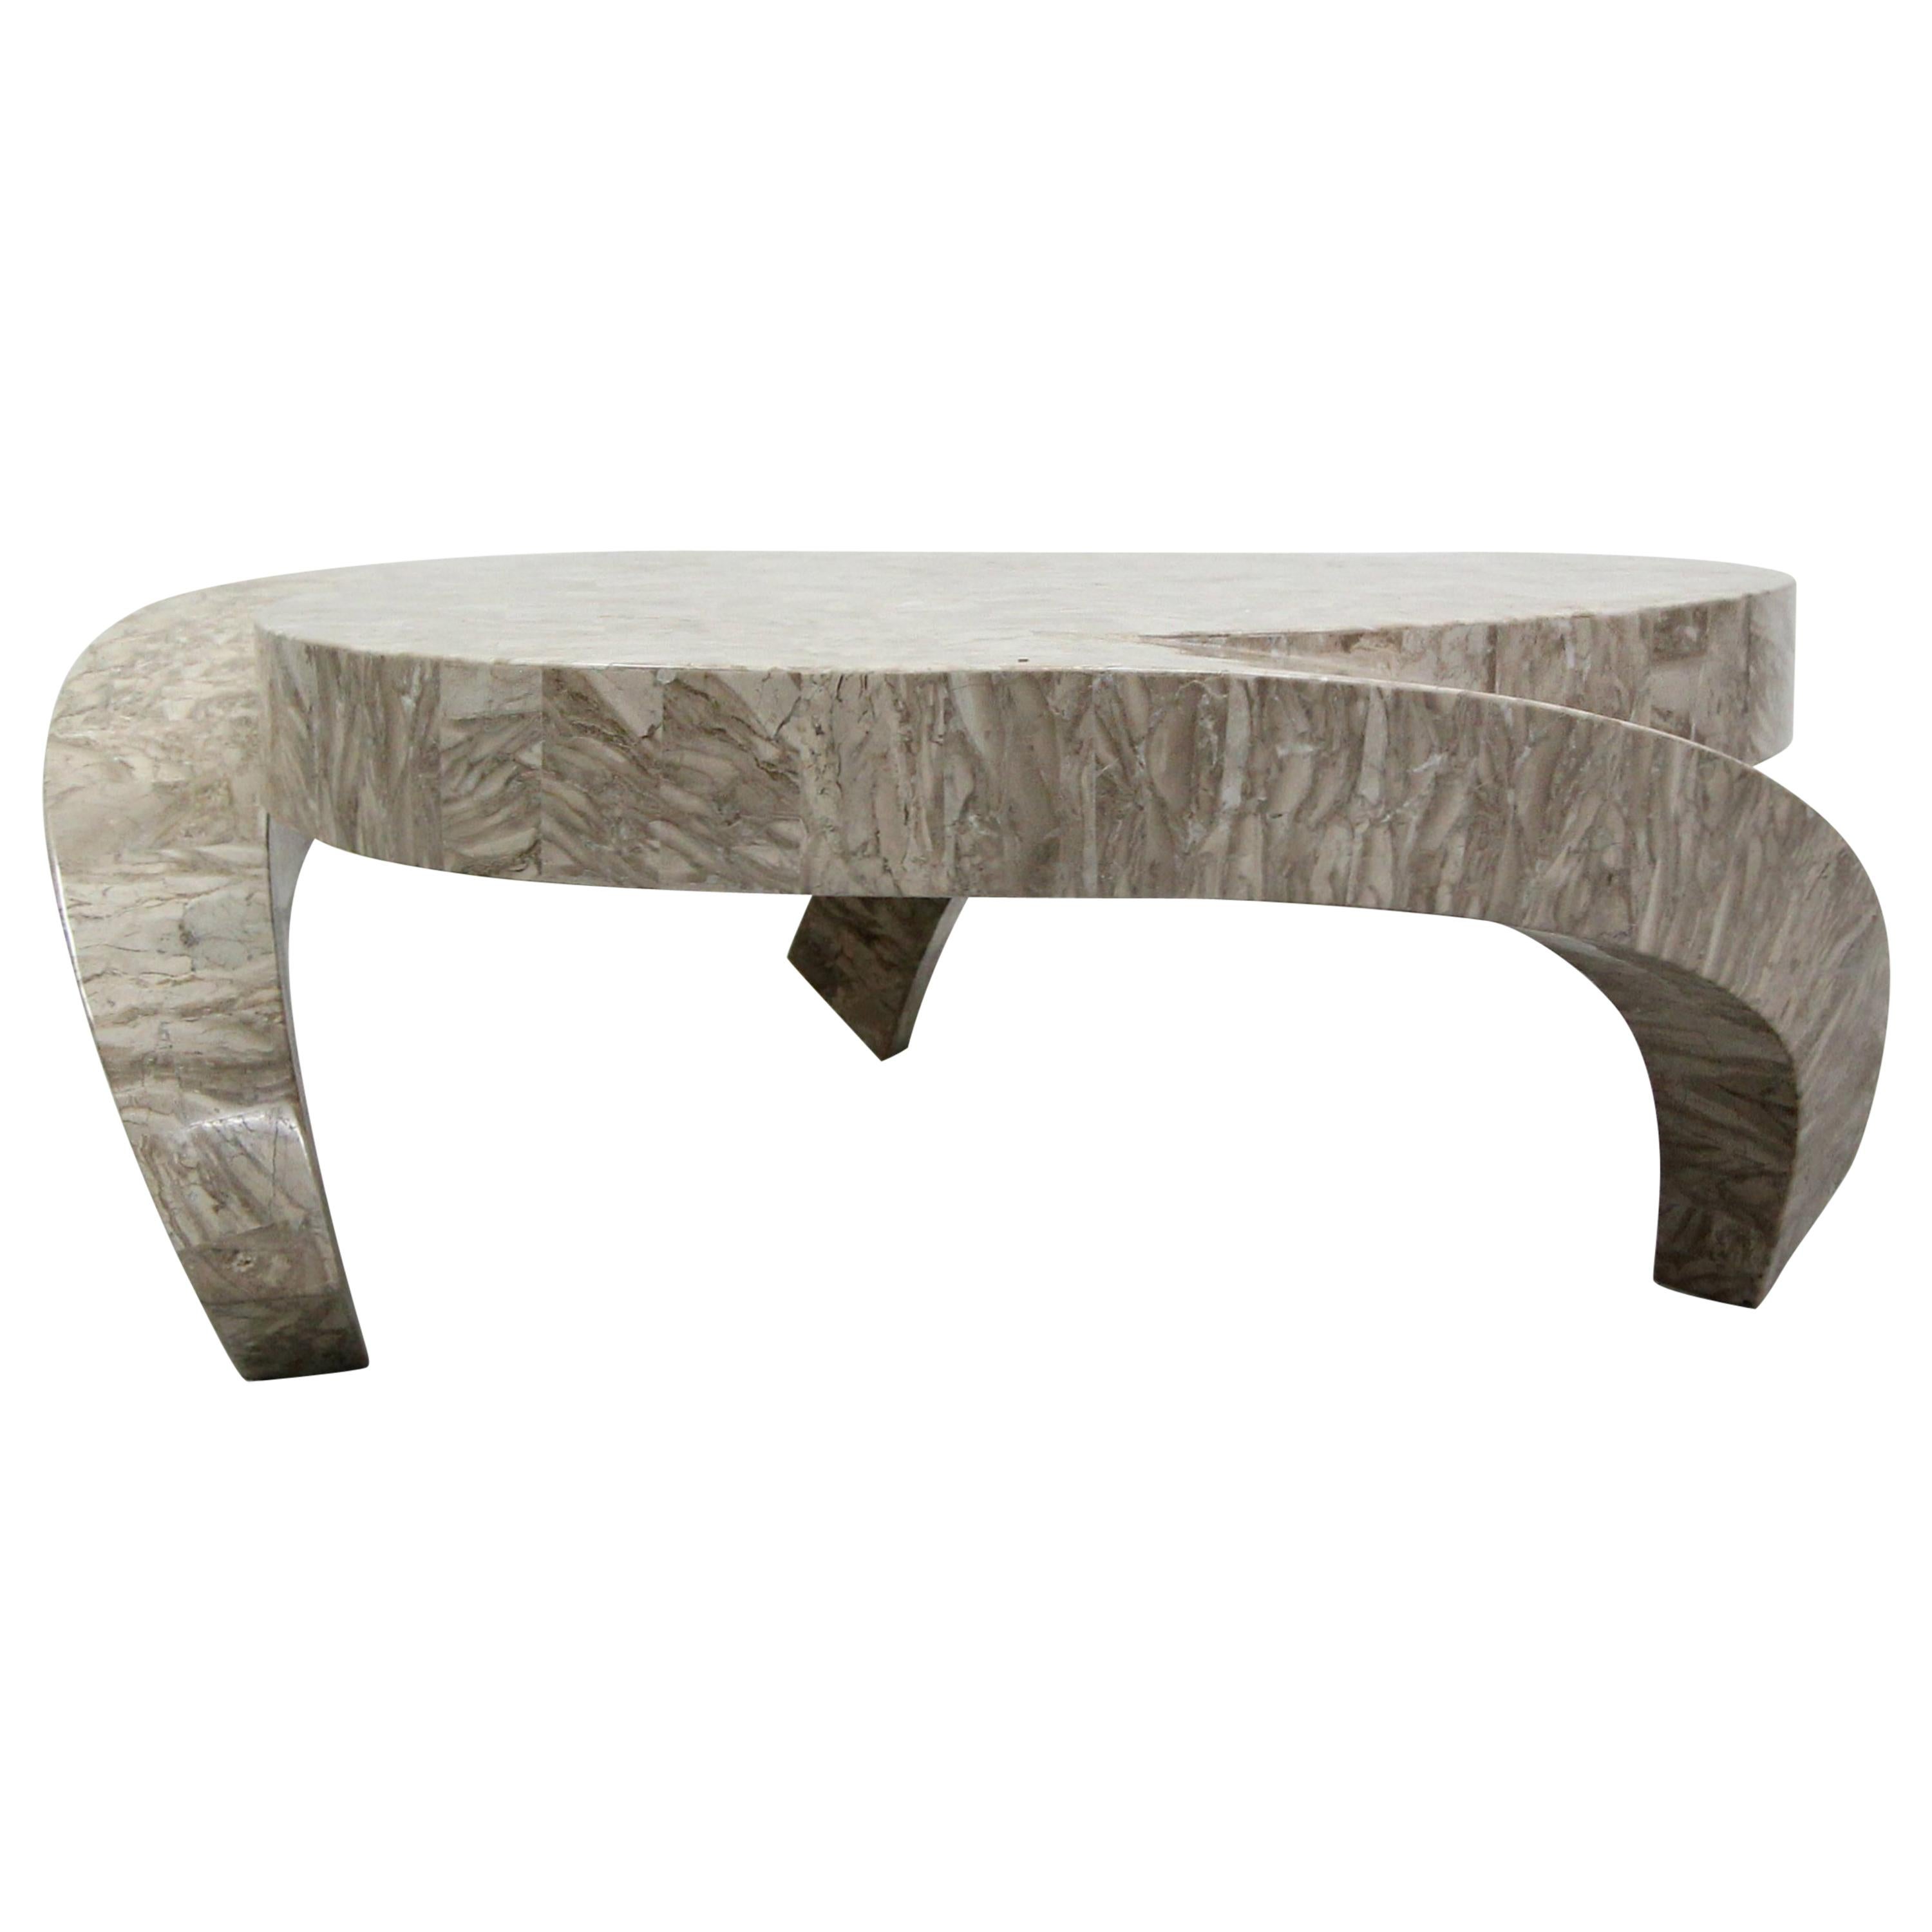 Tessellated Stone Tresfoil Coffee Table by Maitland Smith